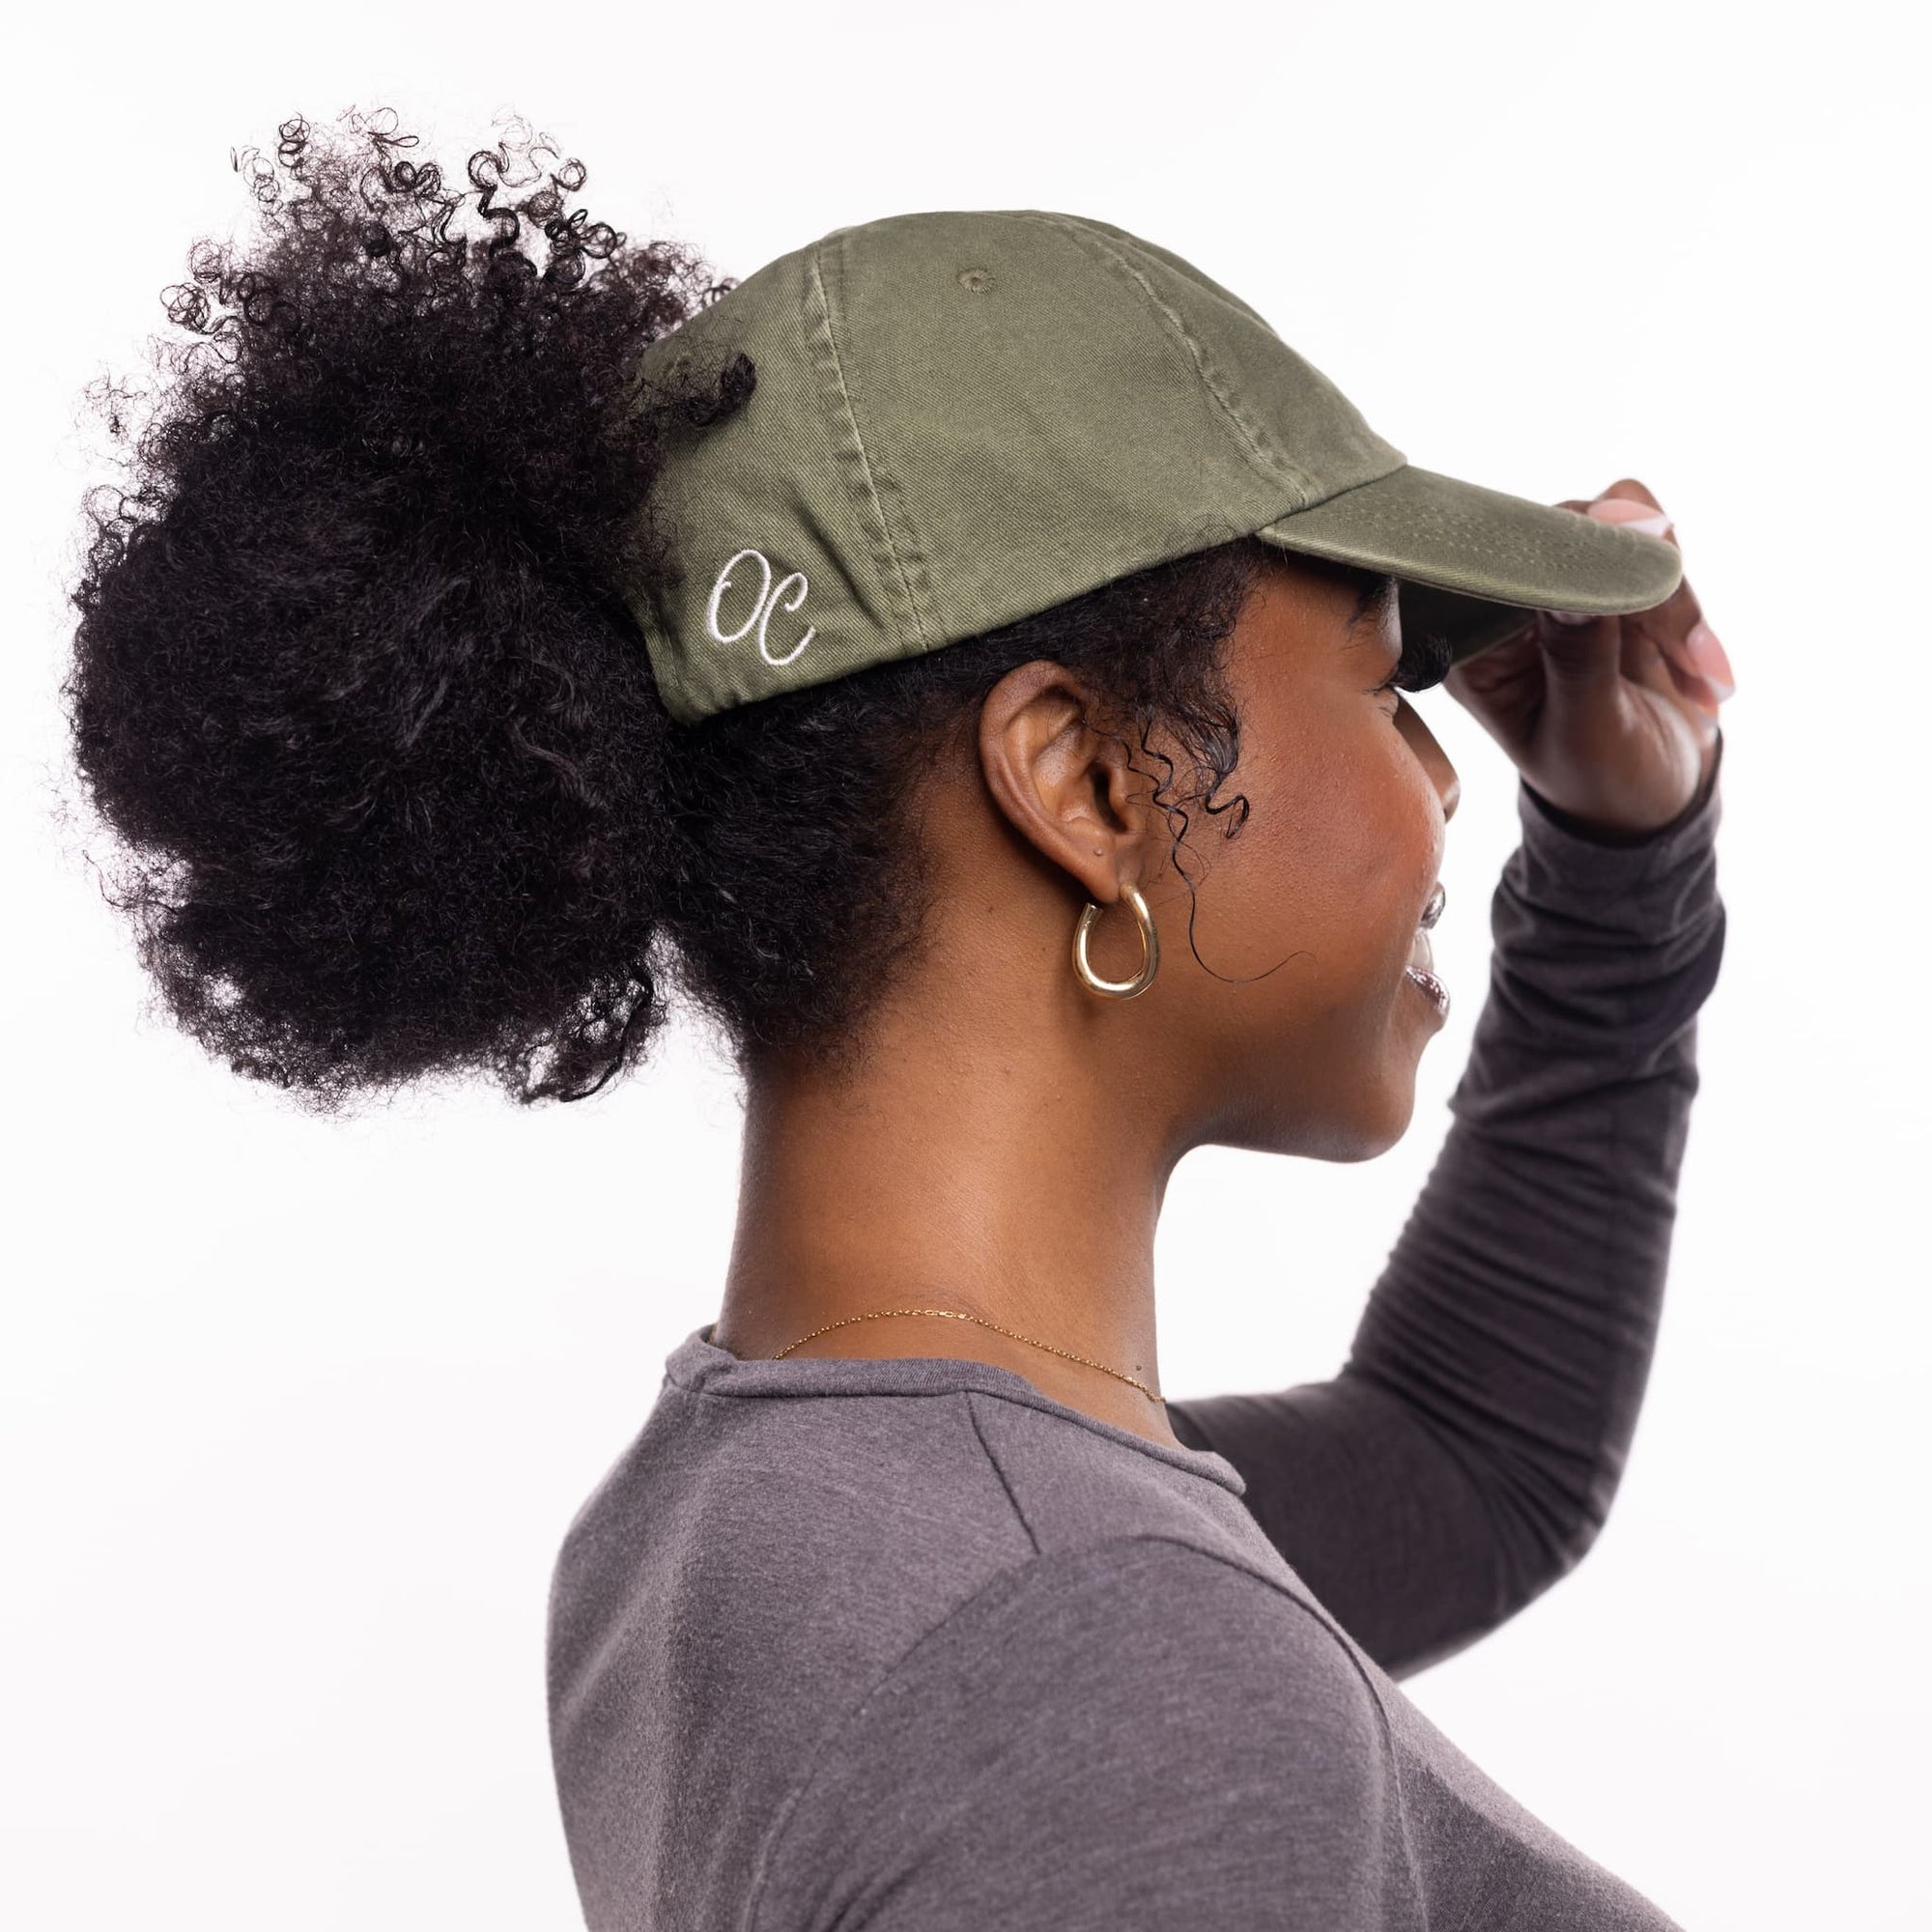 Only Curls Satin Lined Baseball Hat  - Washed Olive - Only Curls